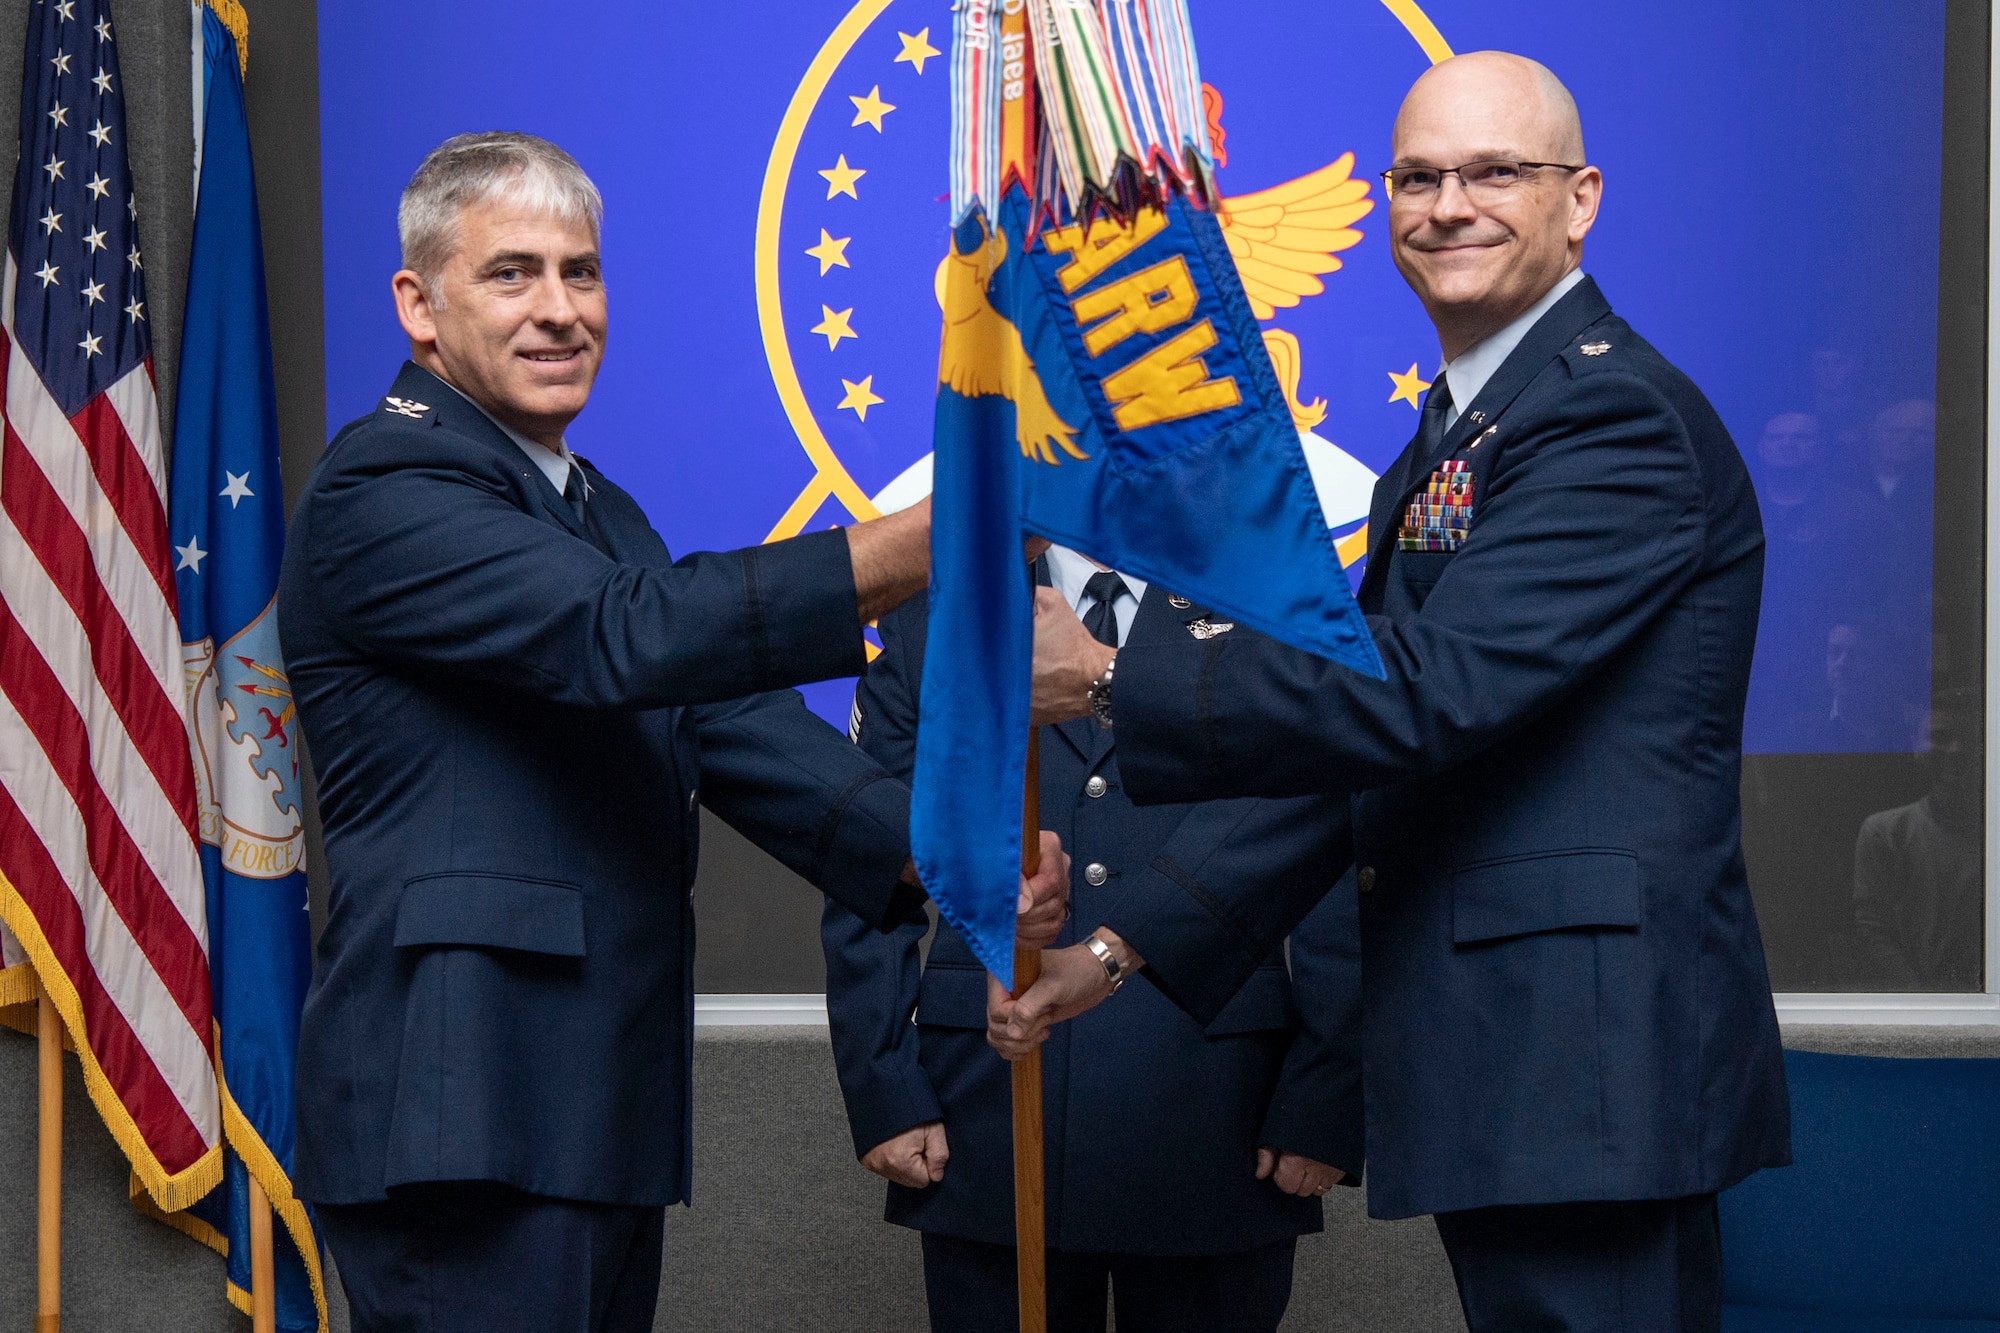 Street takes command of 72nd ARS